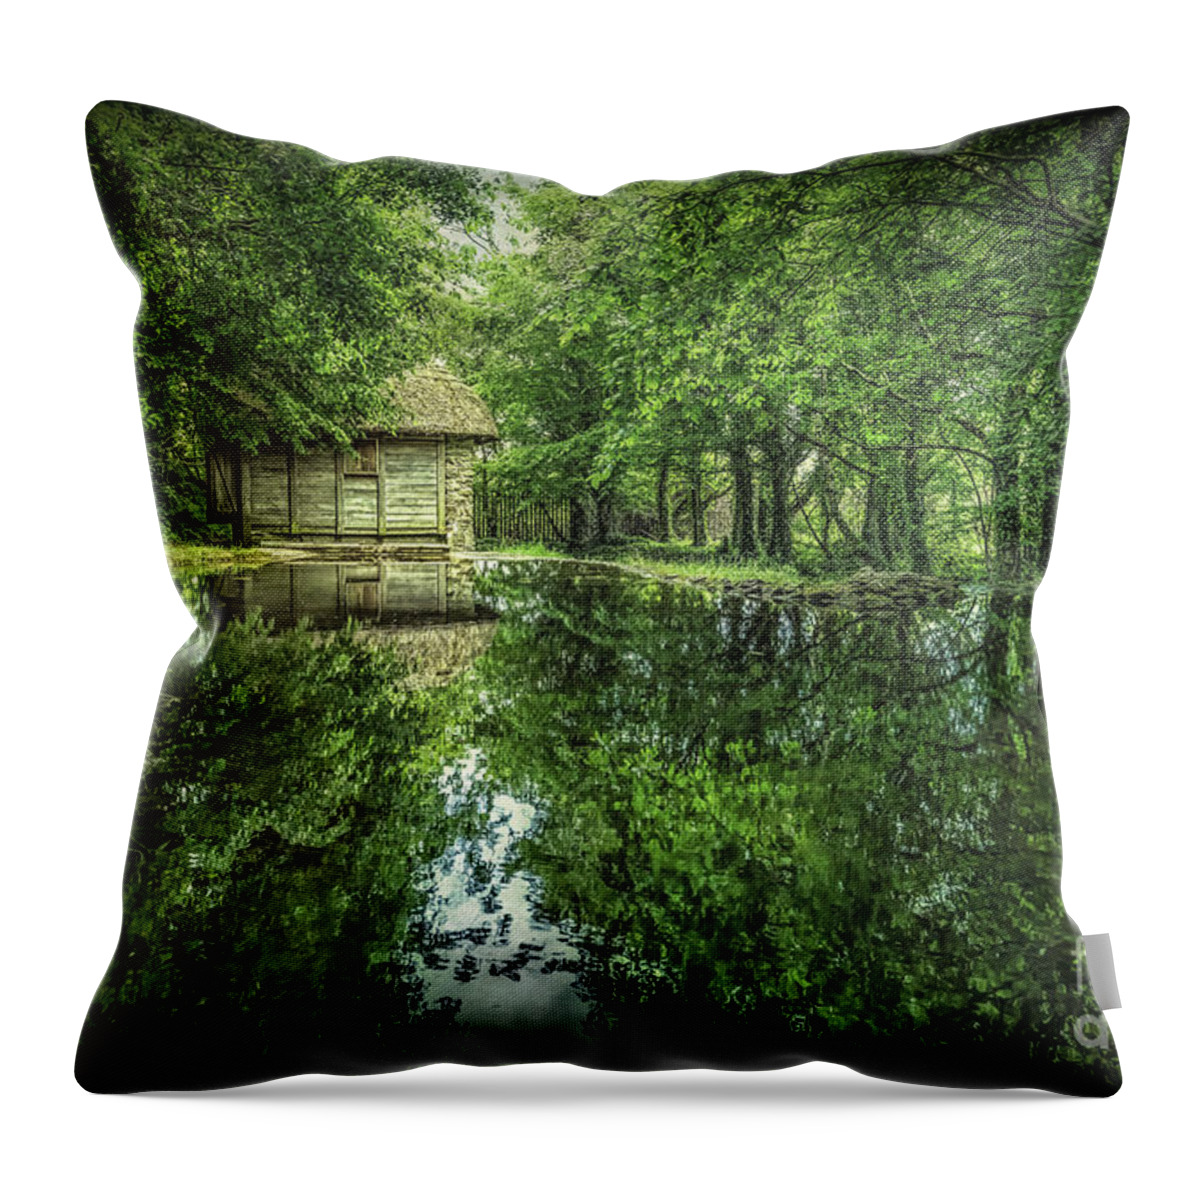 Bunratty Throw Pillow featuring the photograph Endless Shades Of Green by Evelina Kremsdorf